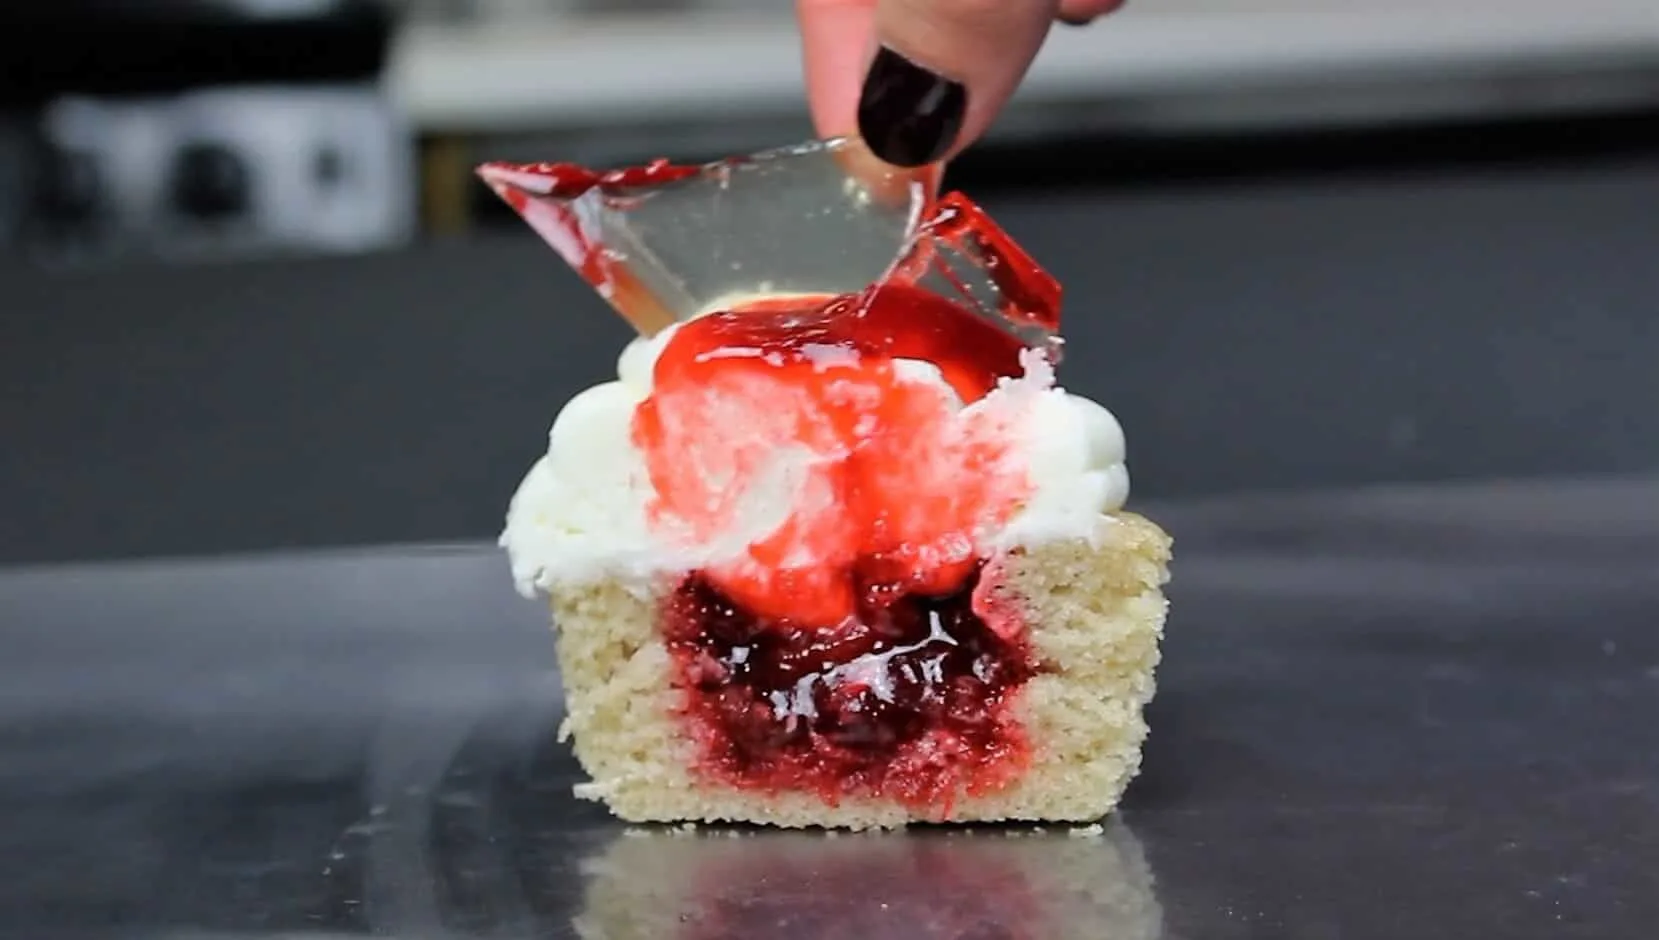 photo of cut open shattered glass cupcake, filled with strawberry jam